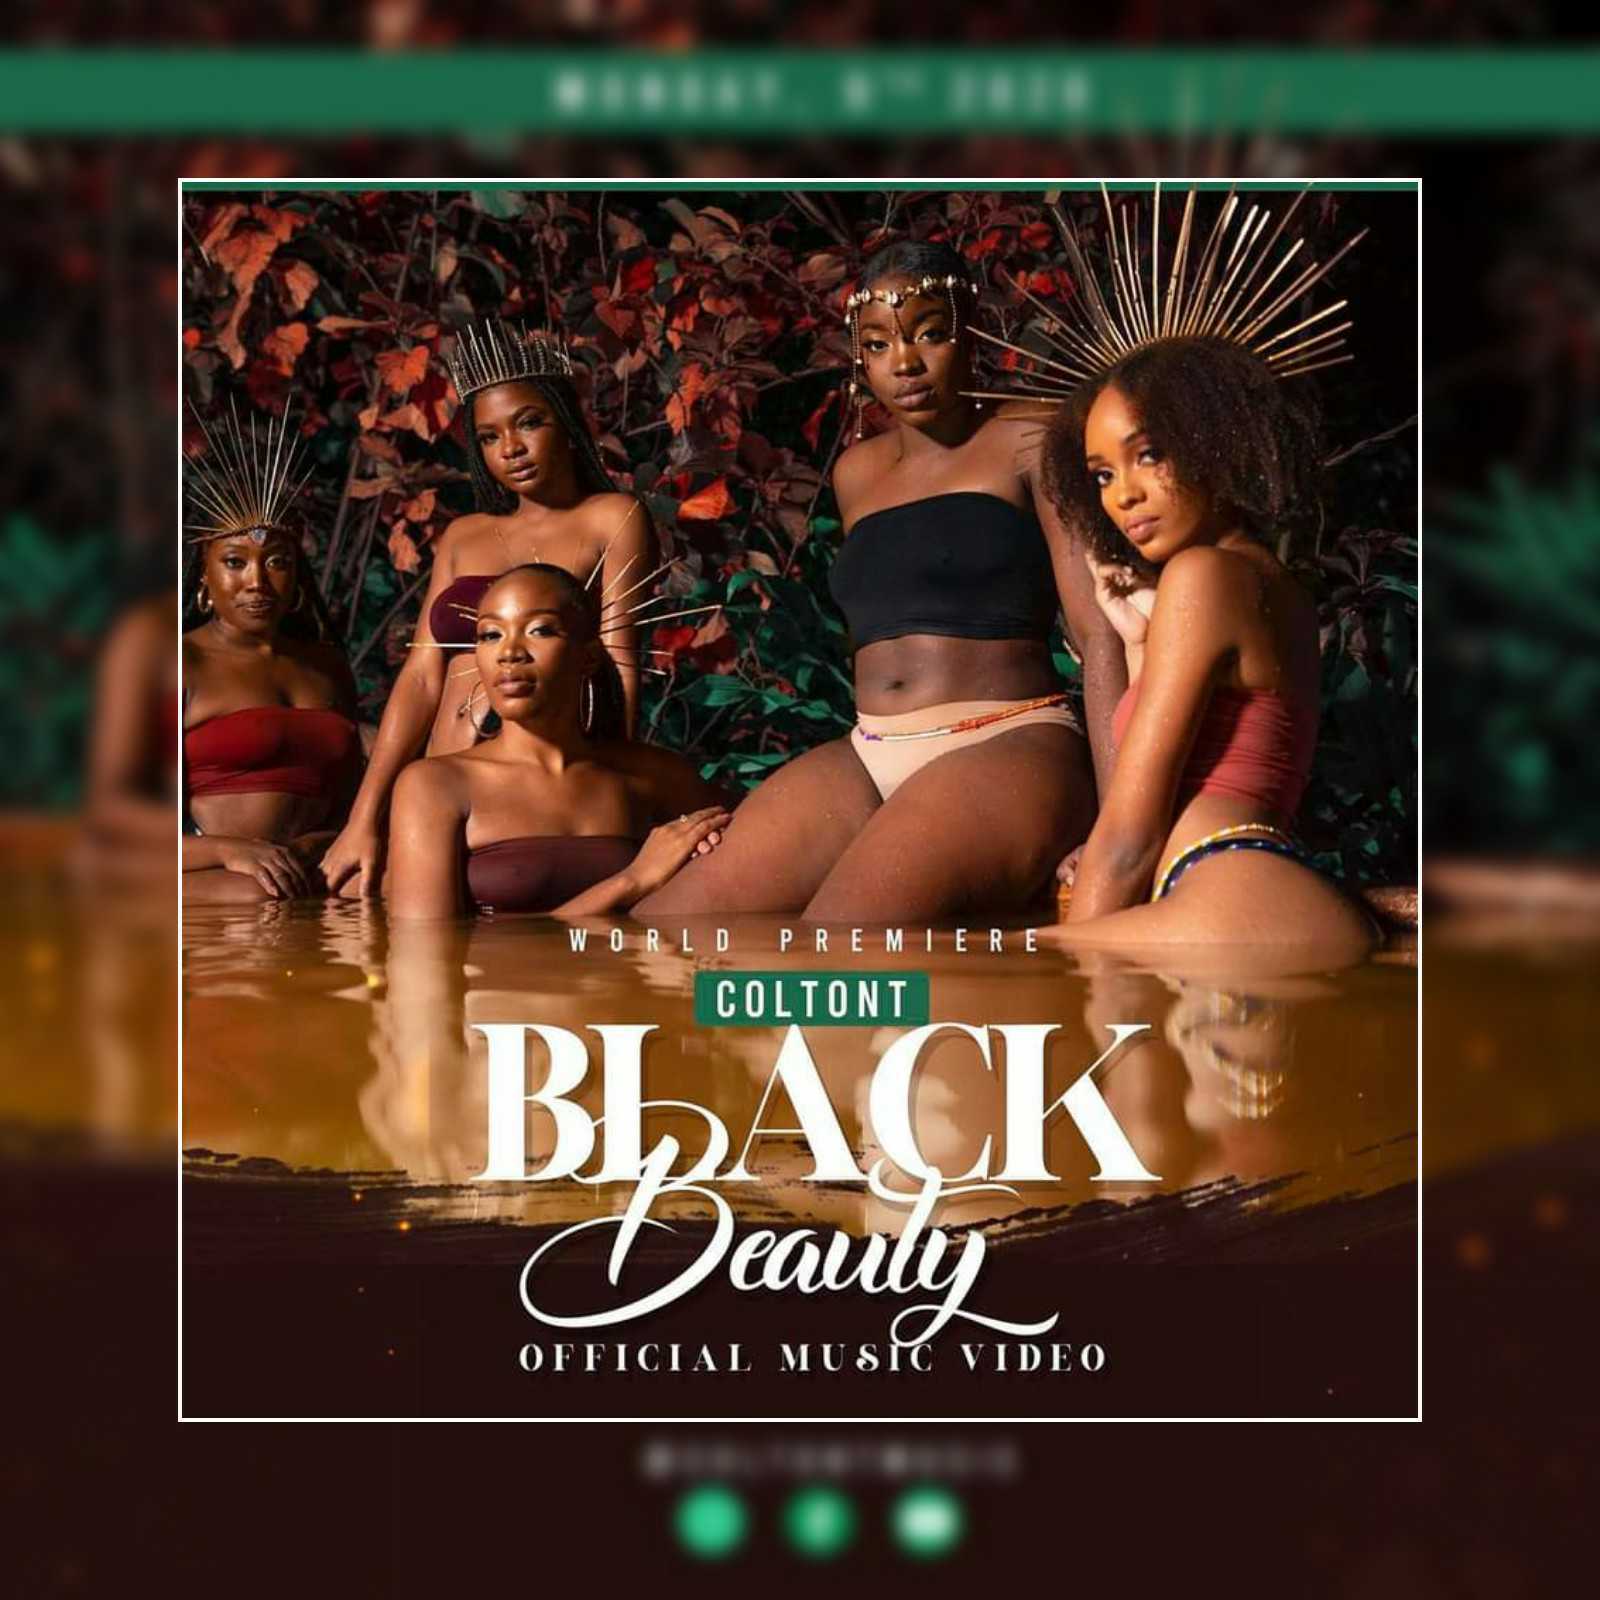  ColtonT releases highly anticipated music video from his Impossible EP album, “Black Beauty”